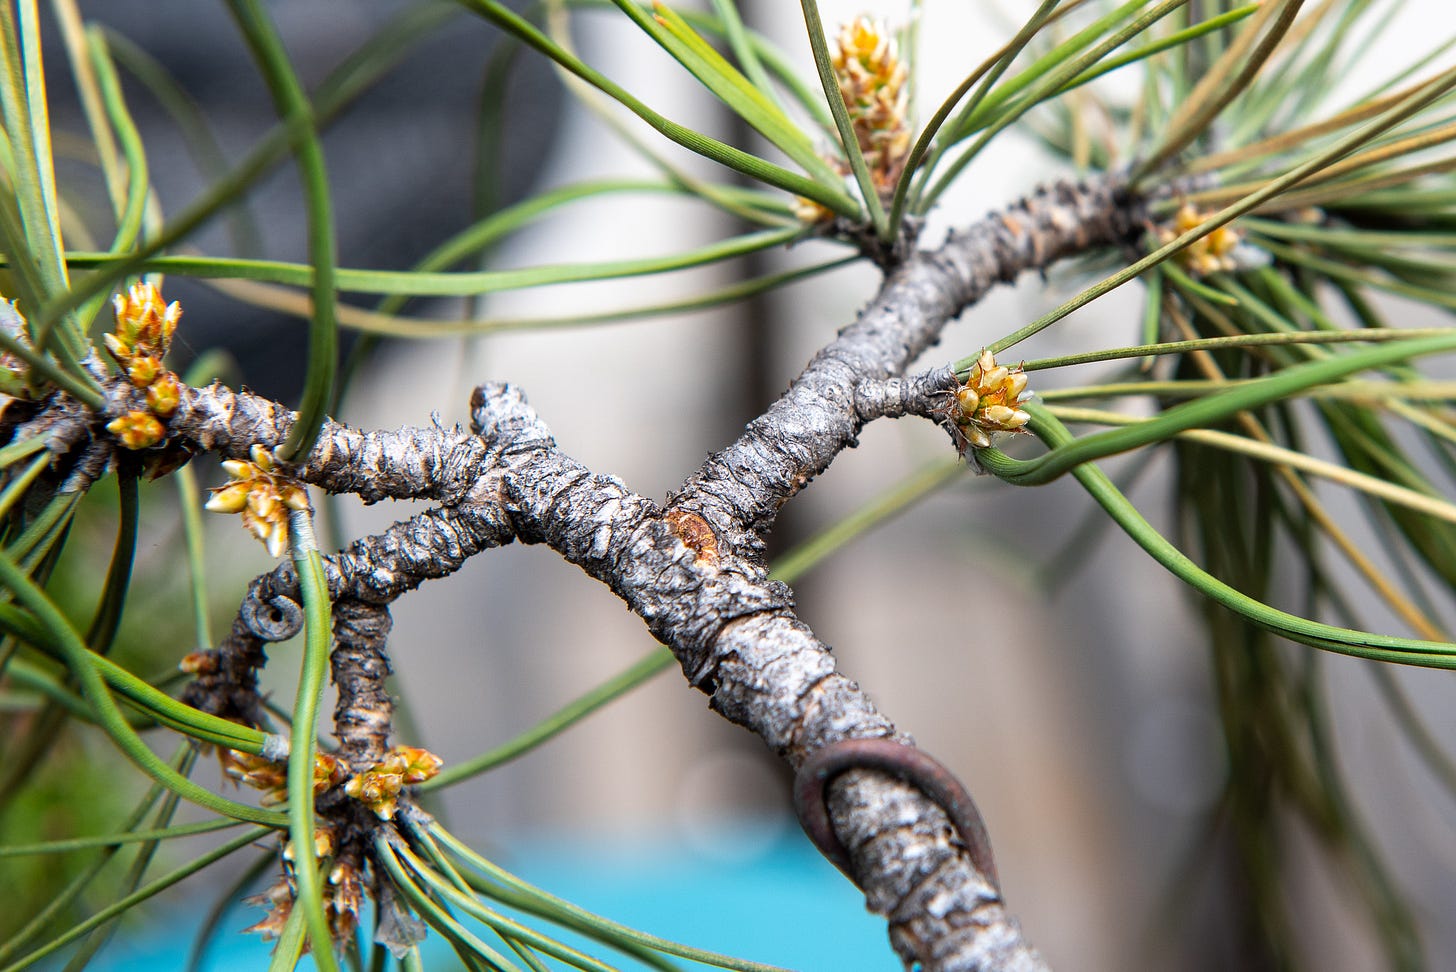 ID: Close up photo of ponderosa pine buds of needles just beginning to extend and shoot out